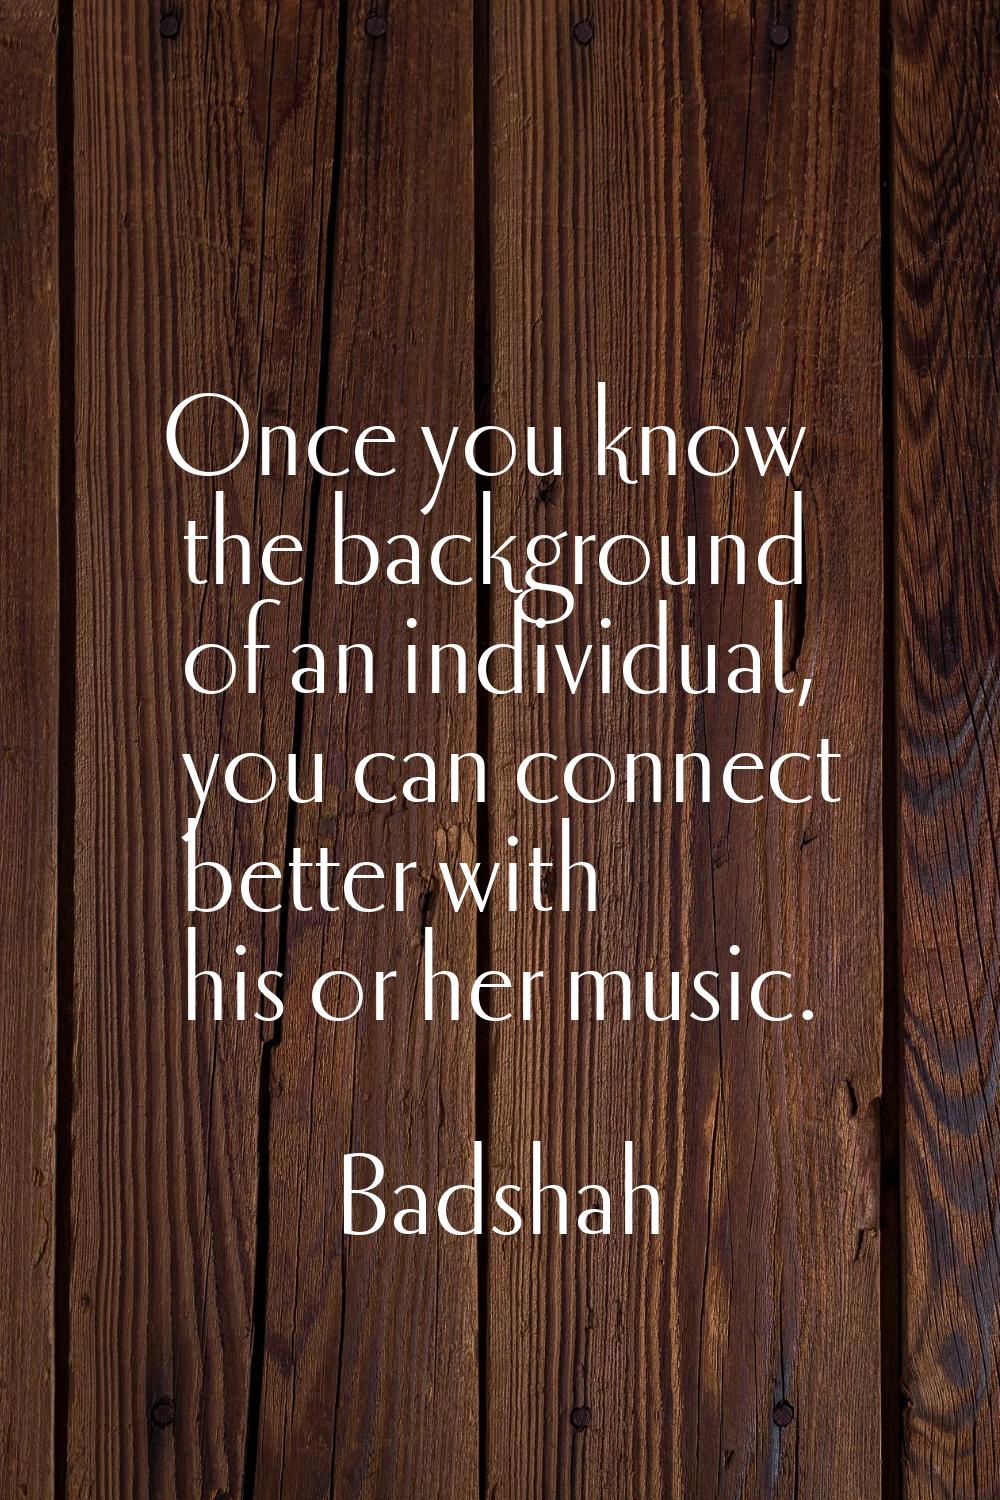 Once you know the background of an individual, you can connect better with his or her music.